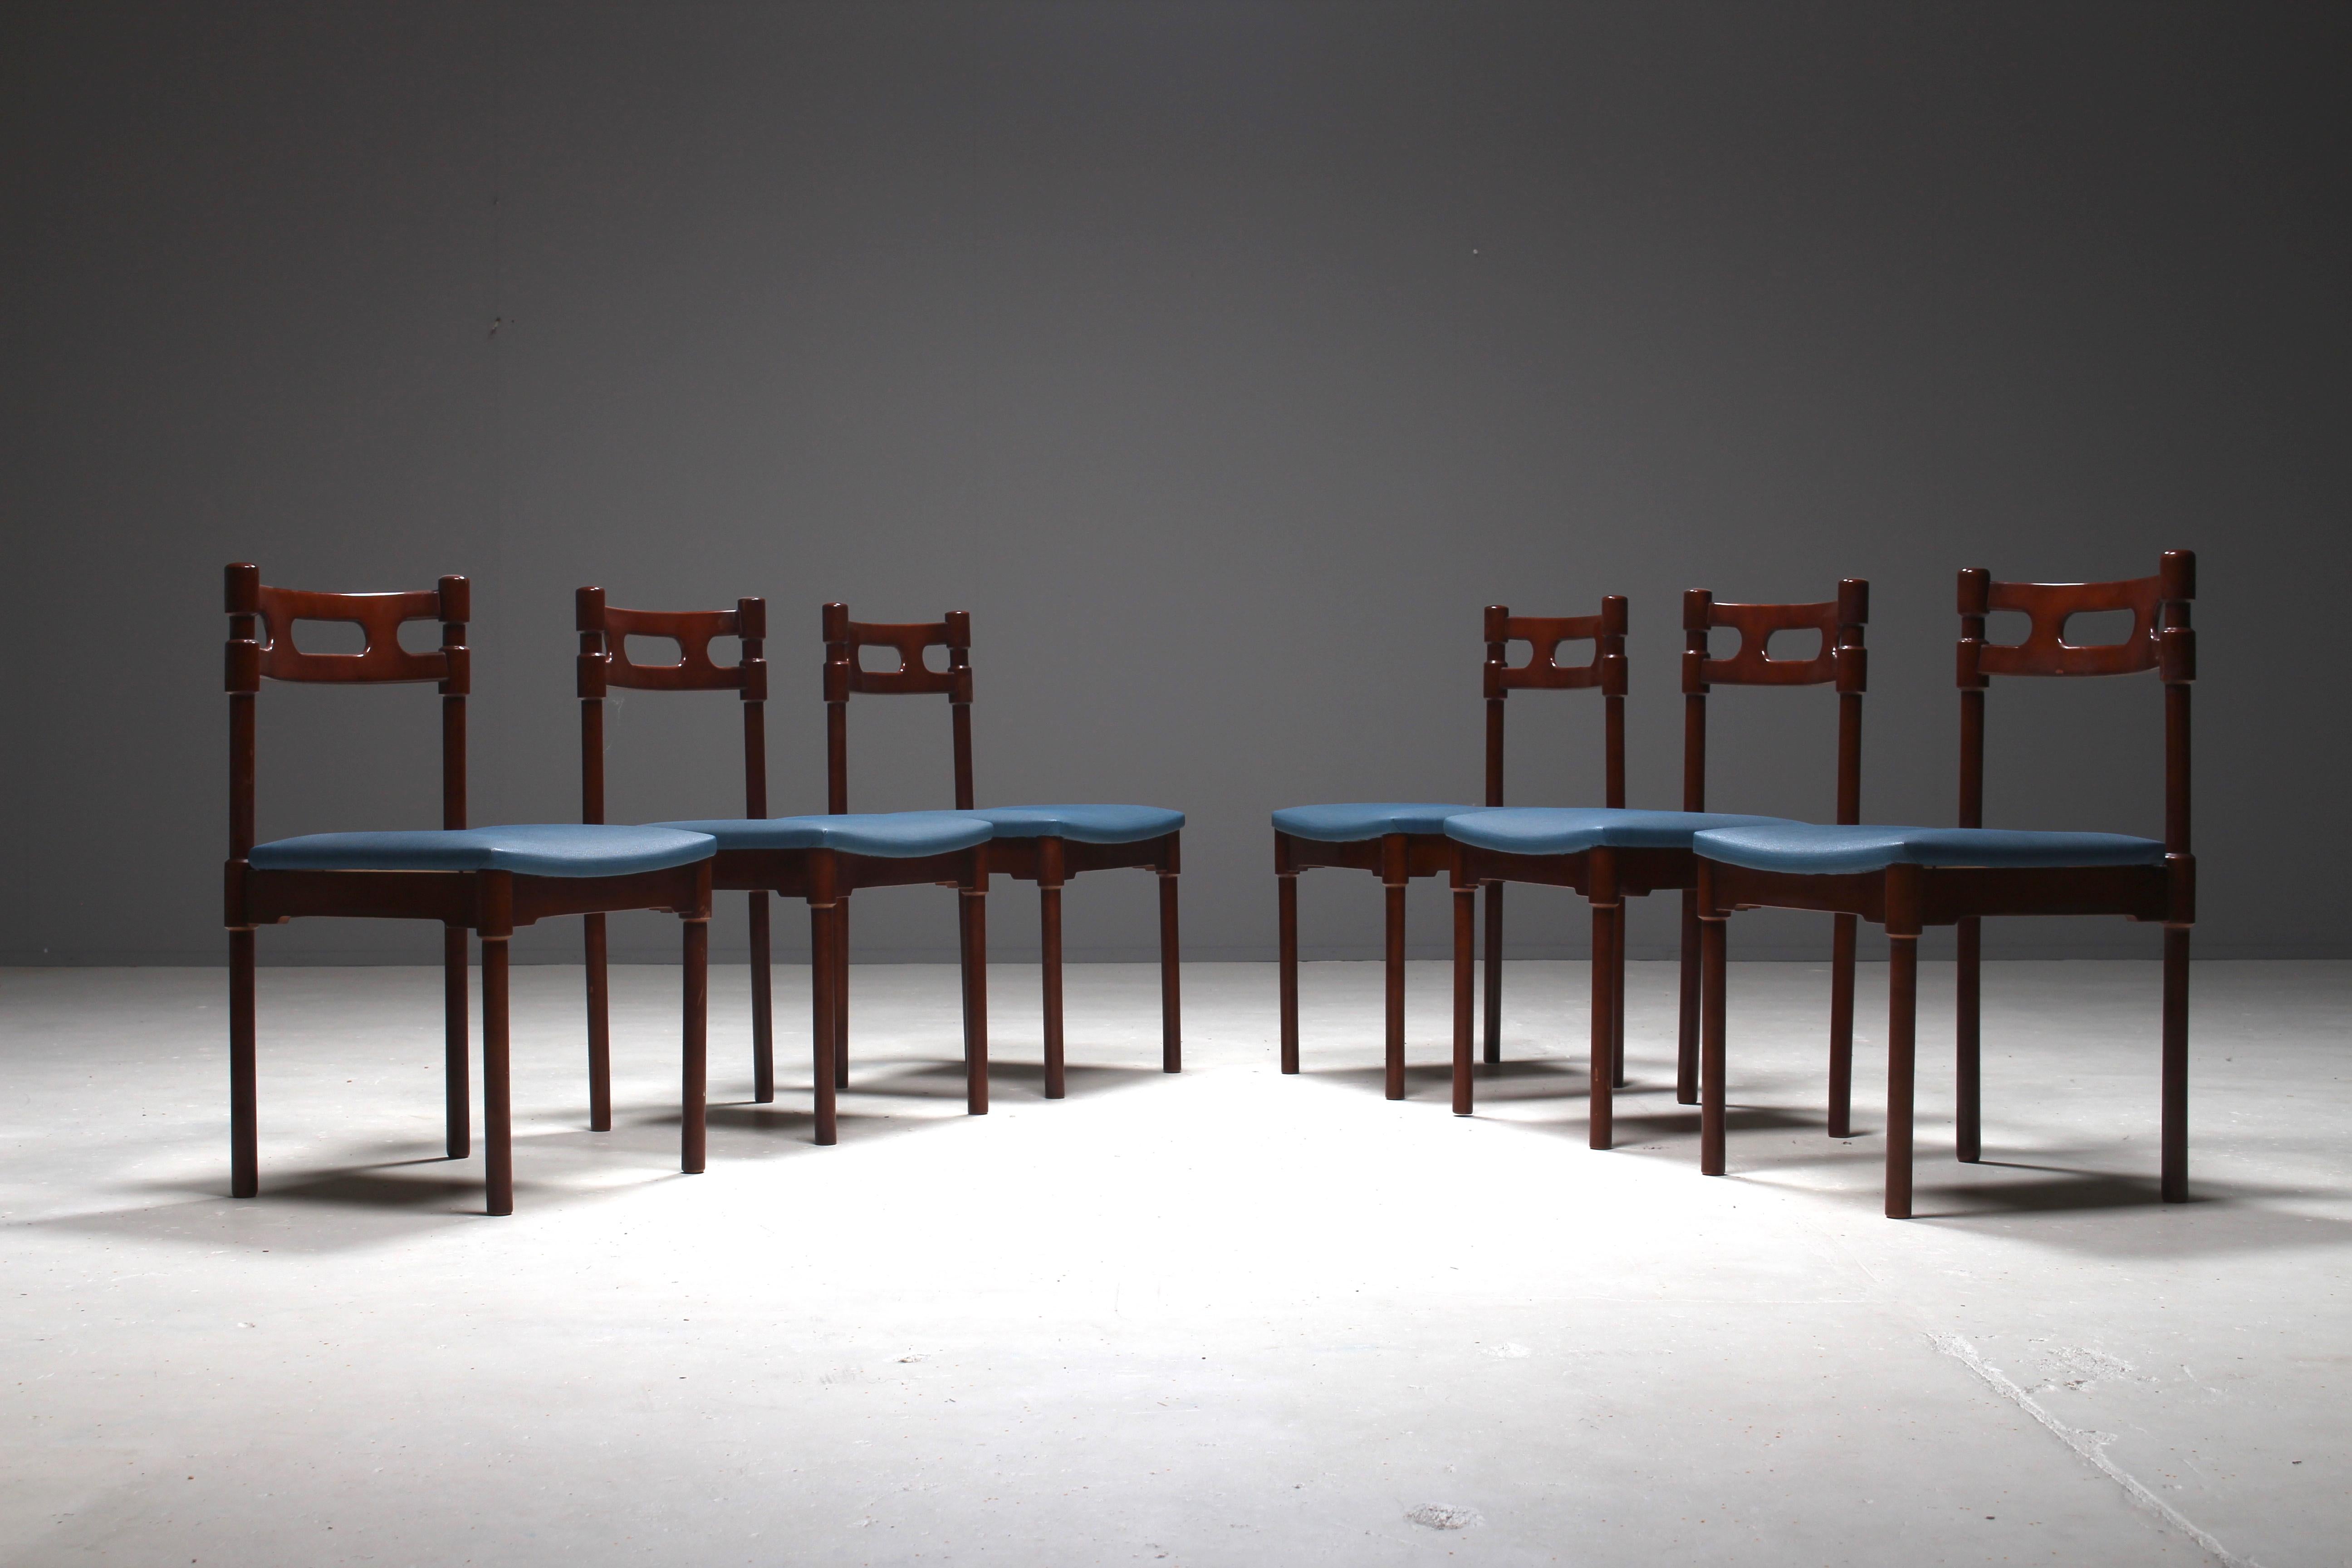 Beautiful set of six Italian dining chairs in the style of the Italian designer Gianfranco Frattini from the 1960s.
These glossy lacquered walnut chairs do have very sculptural Classic elements and also look very modern.
The chairs are upholstered